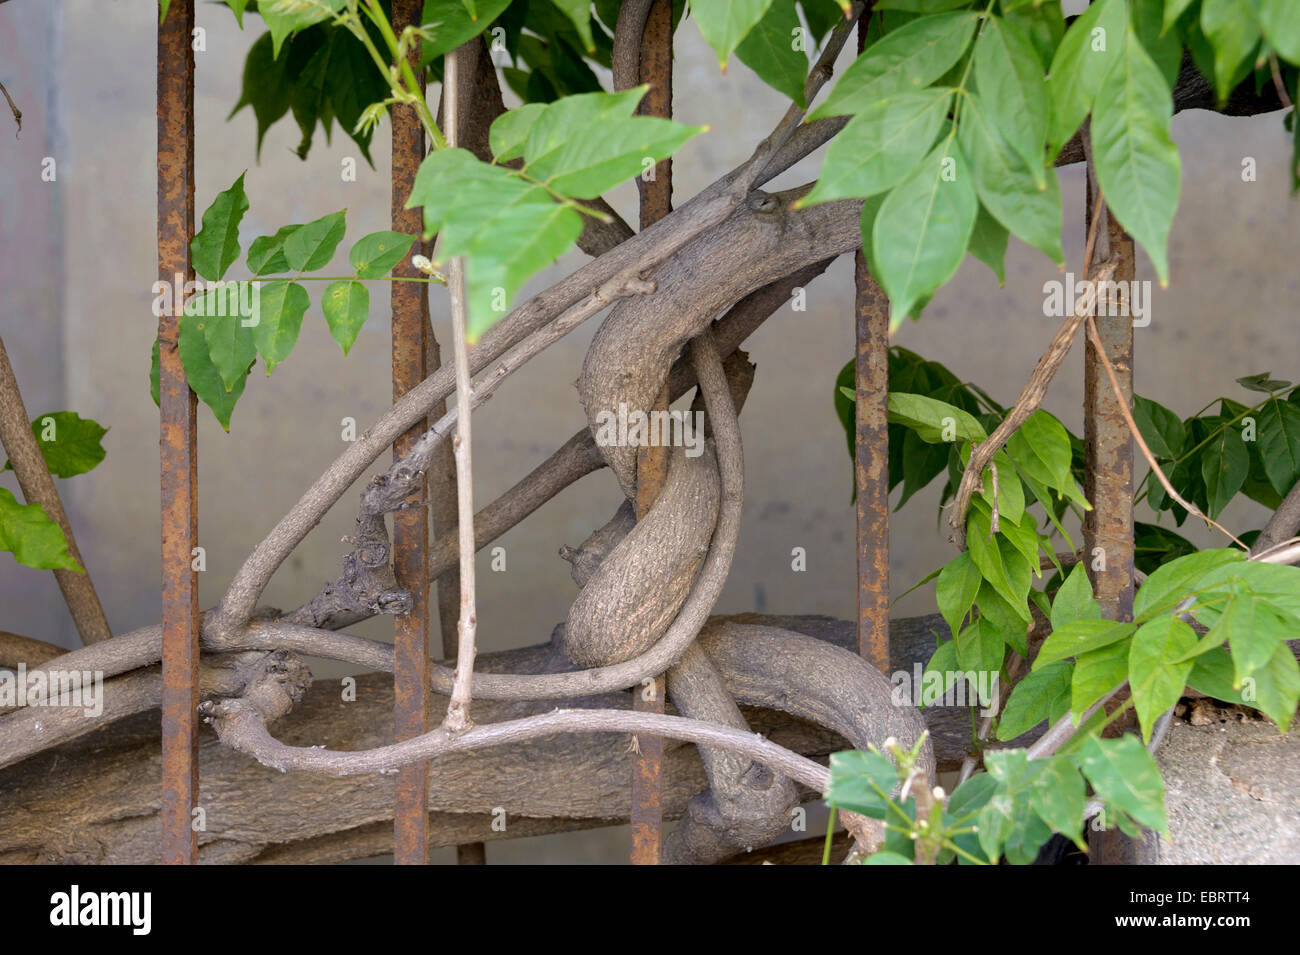 Chinese wisteria (Wisteria sinensis), climbing at a fence, Spain Stock Photo